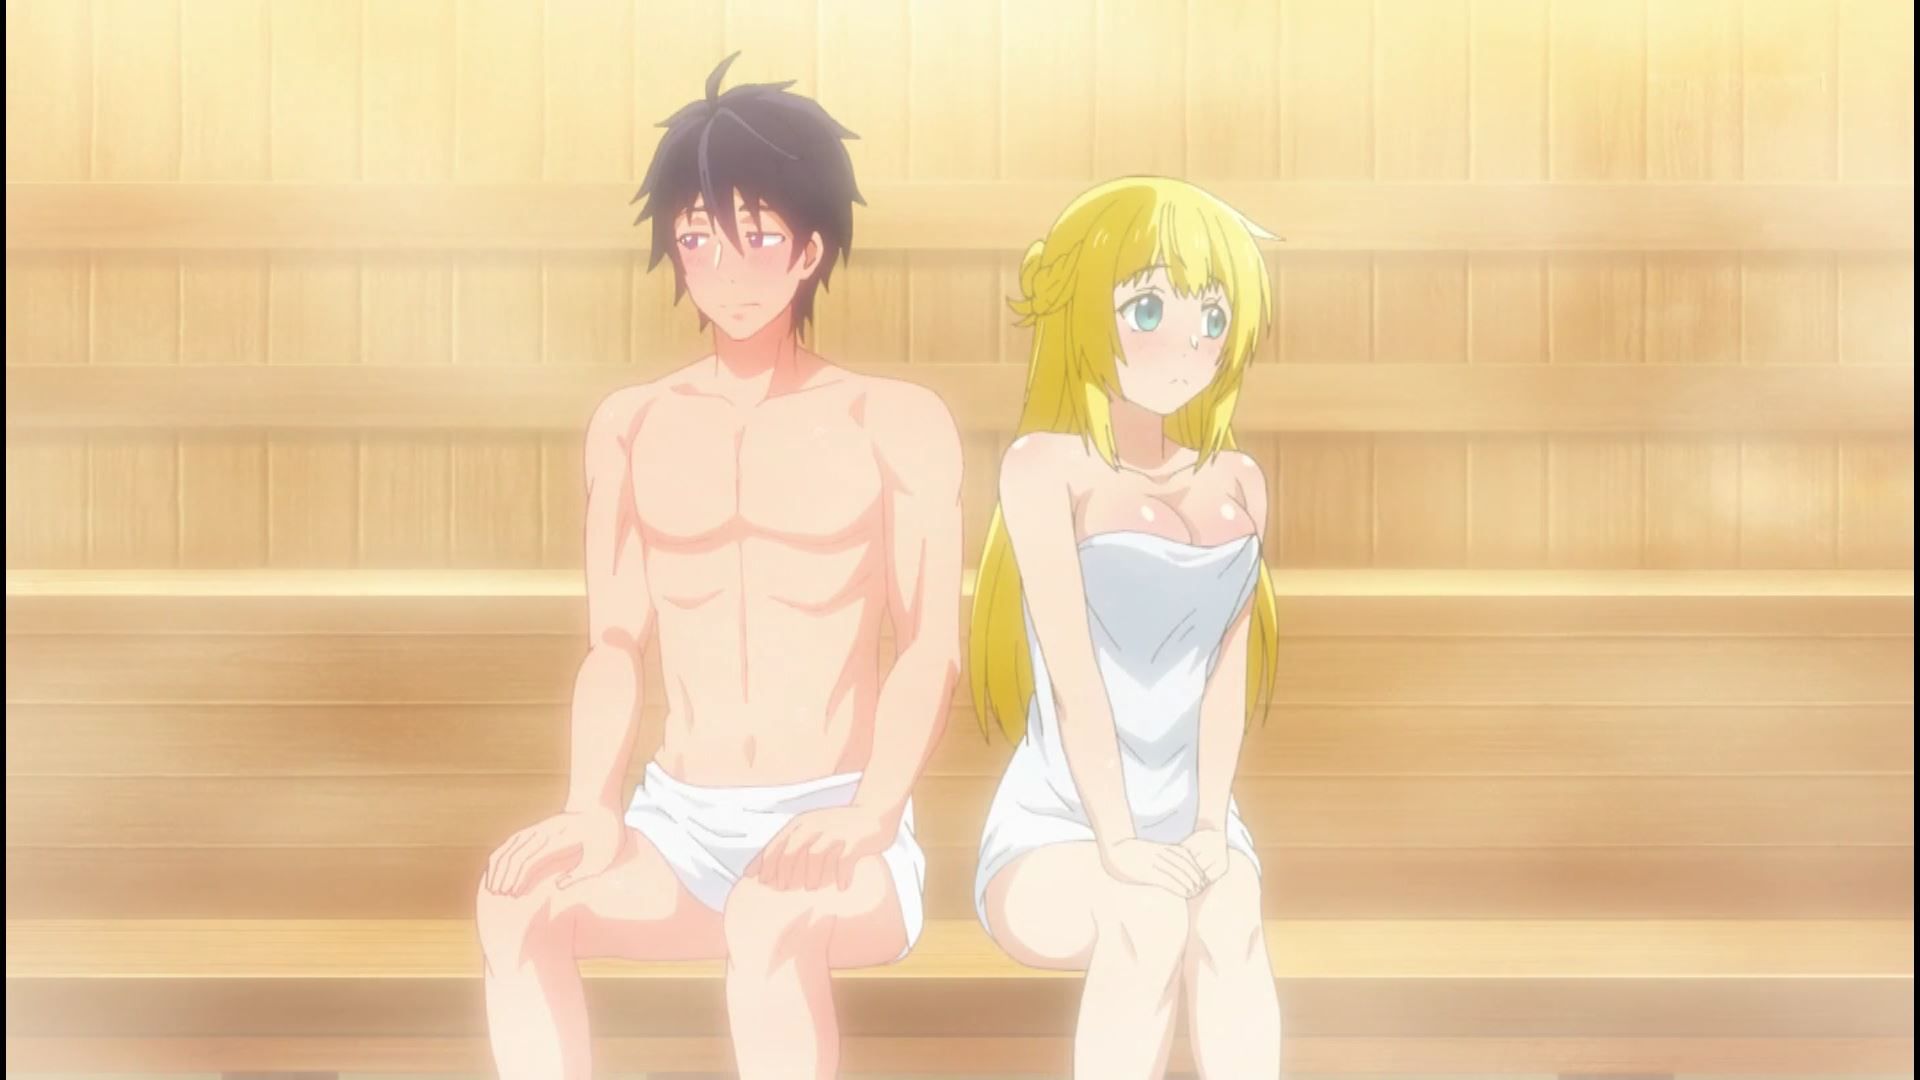 In episode 4 of the anime "True Companion", there is an erotic scene where you enter the sauna naked with an erotic boob girl! 17